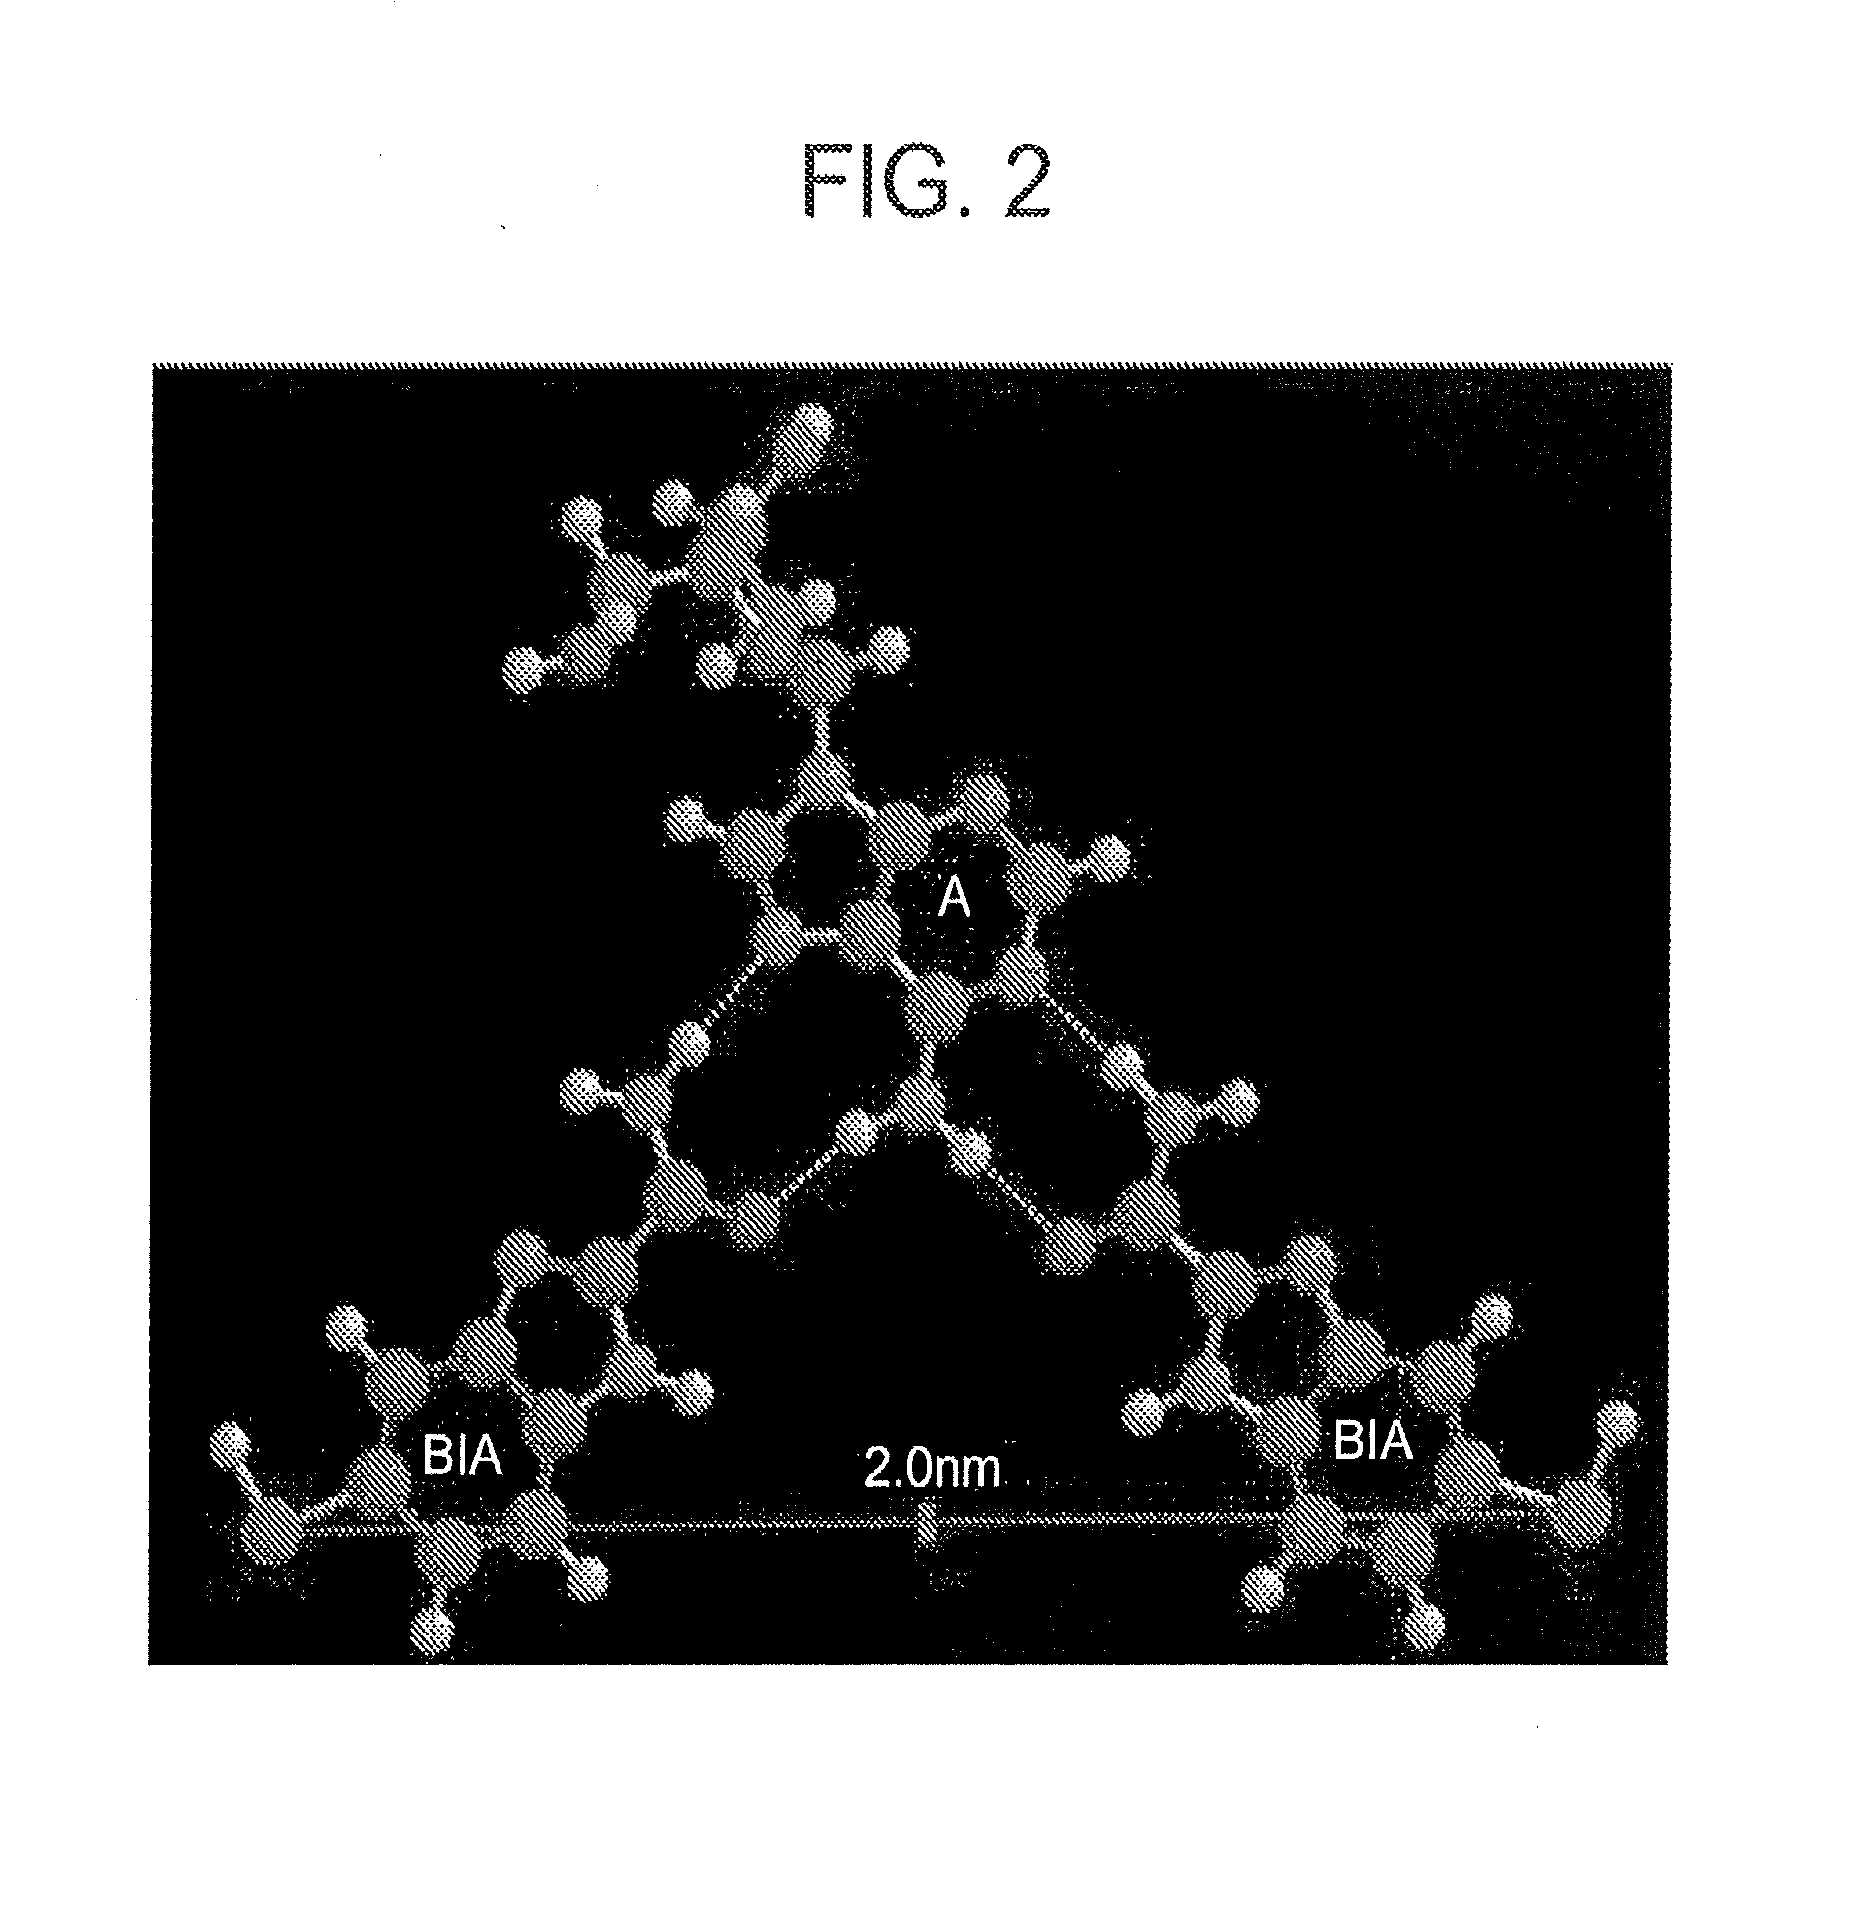 Universal reader molecule for recognition tunneling